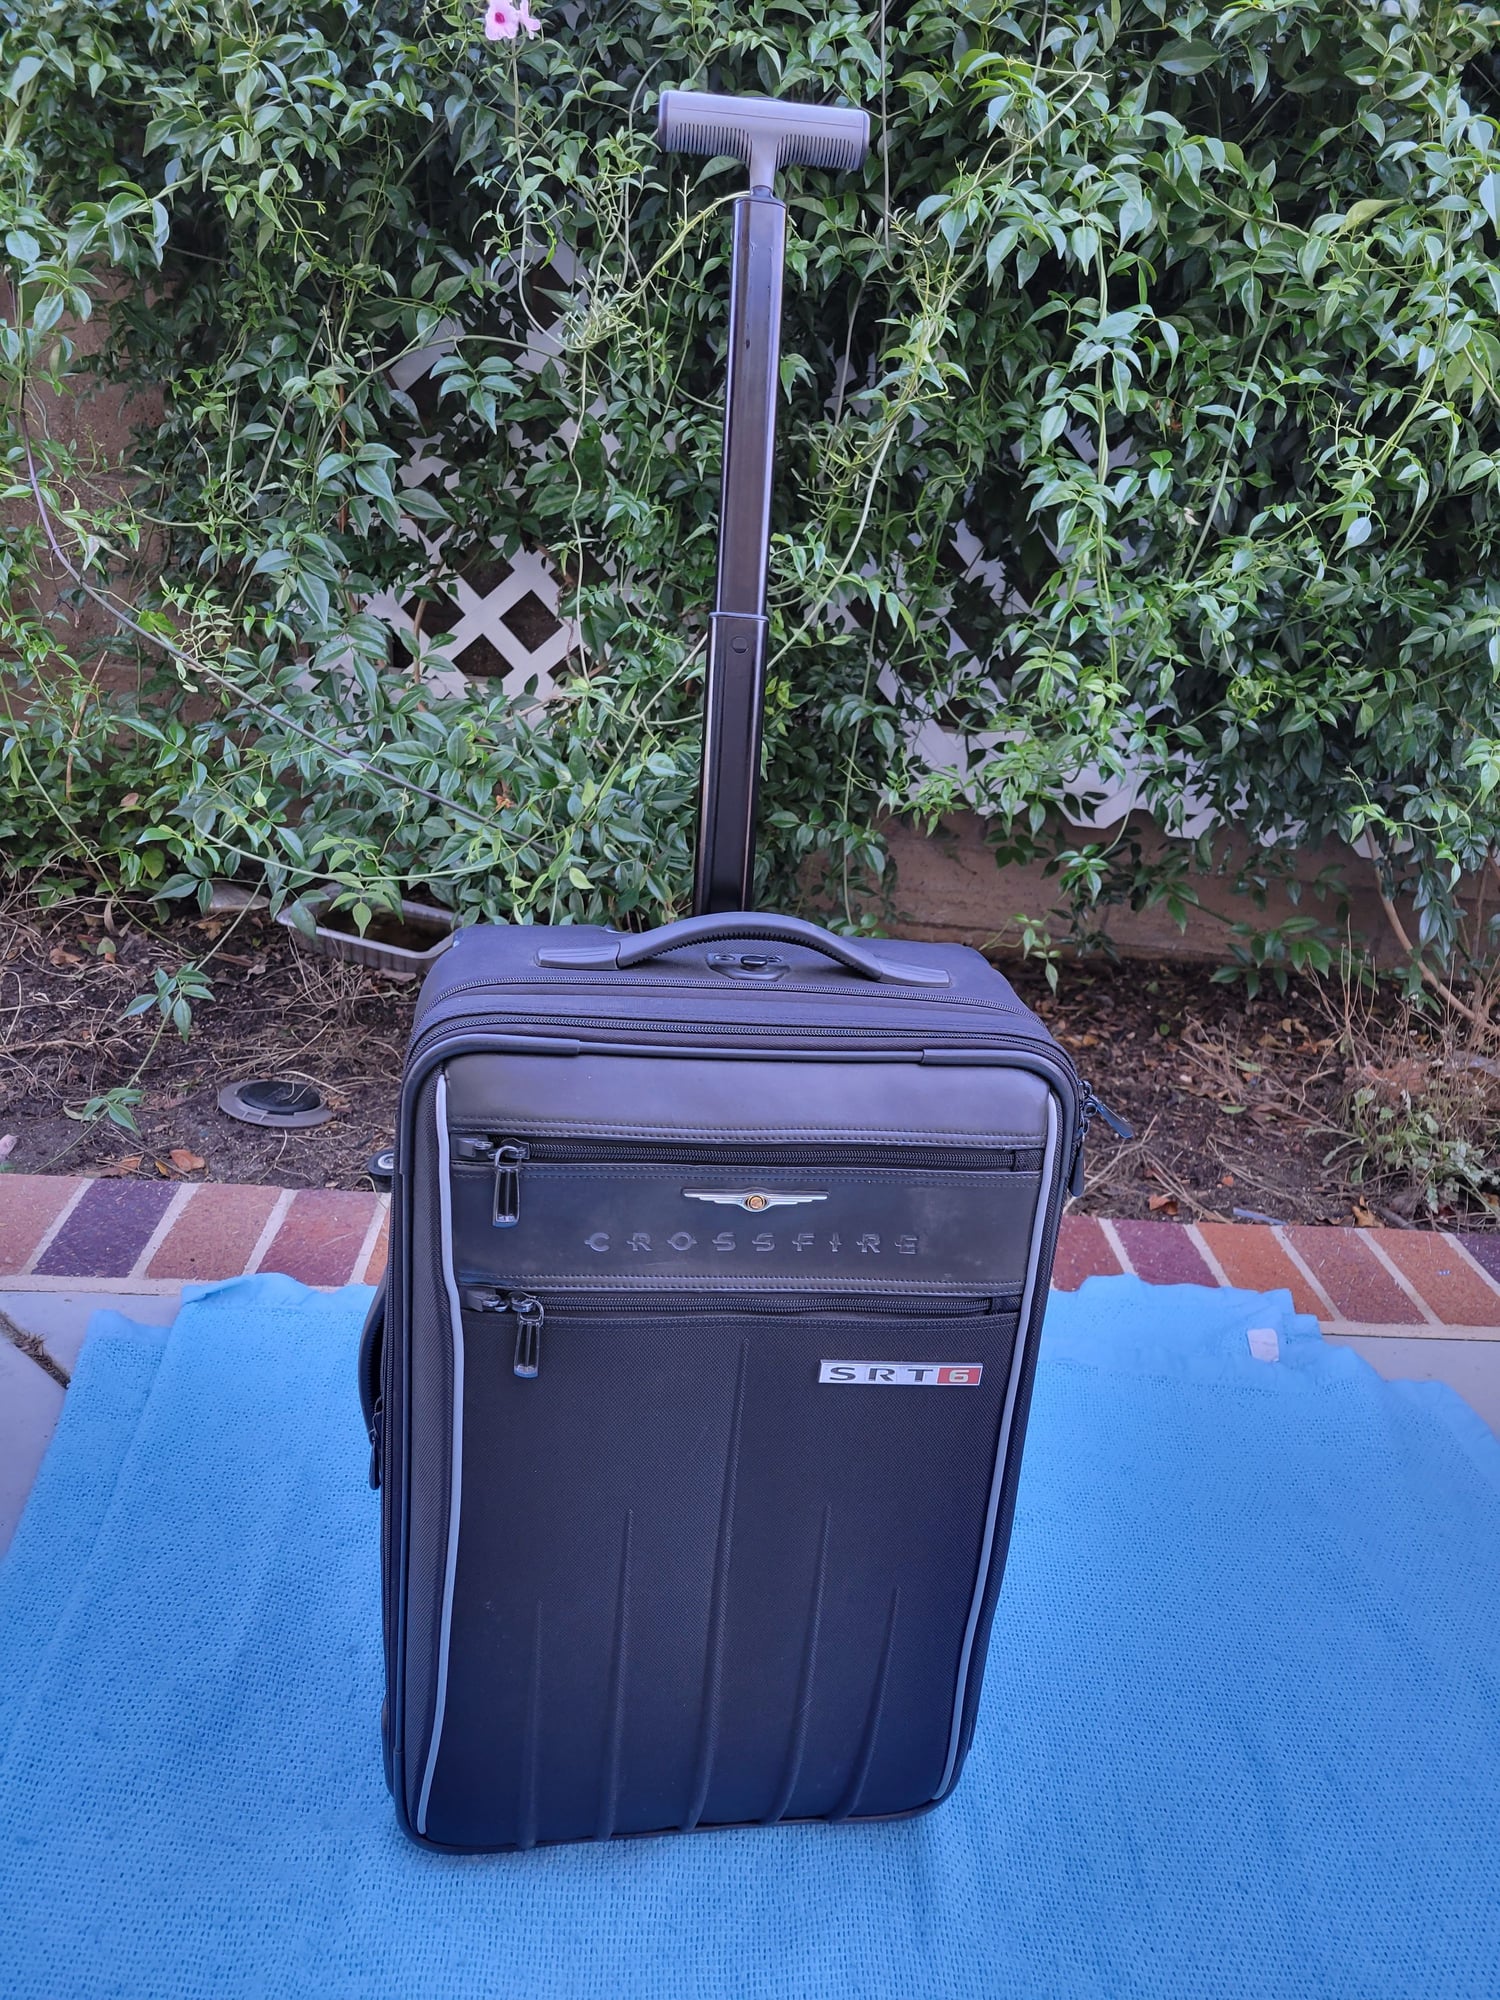 2005 Chrysler Crossfire - 3 Piece SRT6 Luggage Set - Accessories - $50 - Lake Forest, CA 92630, United States